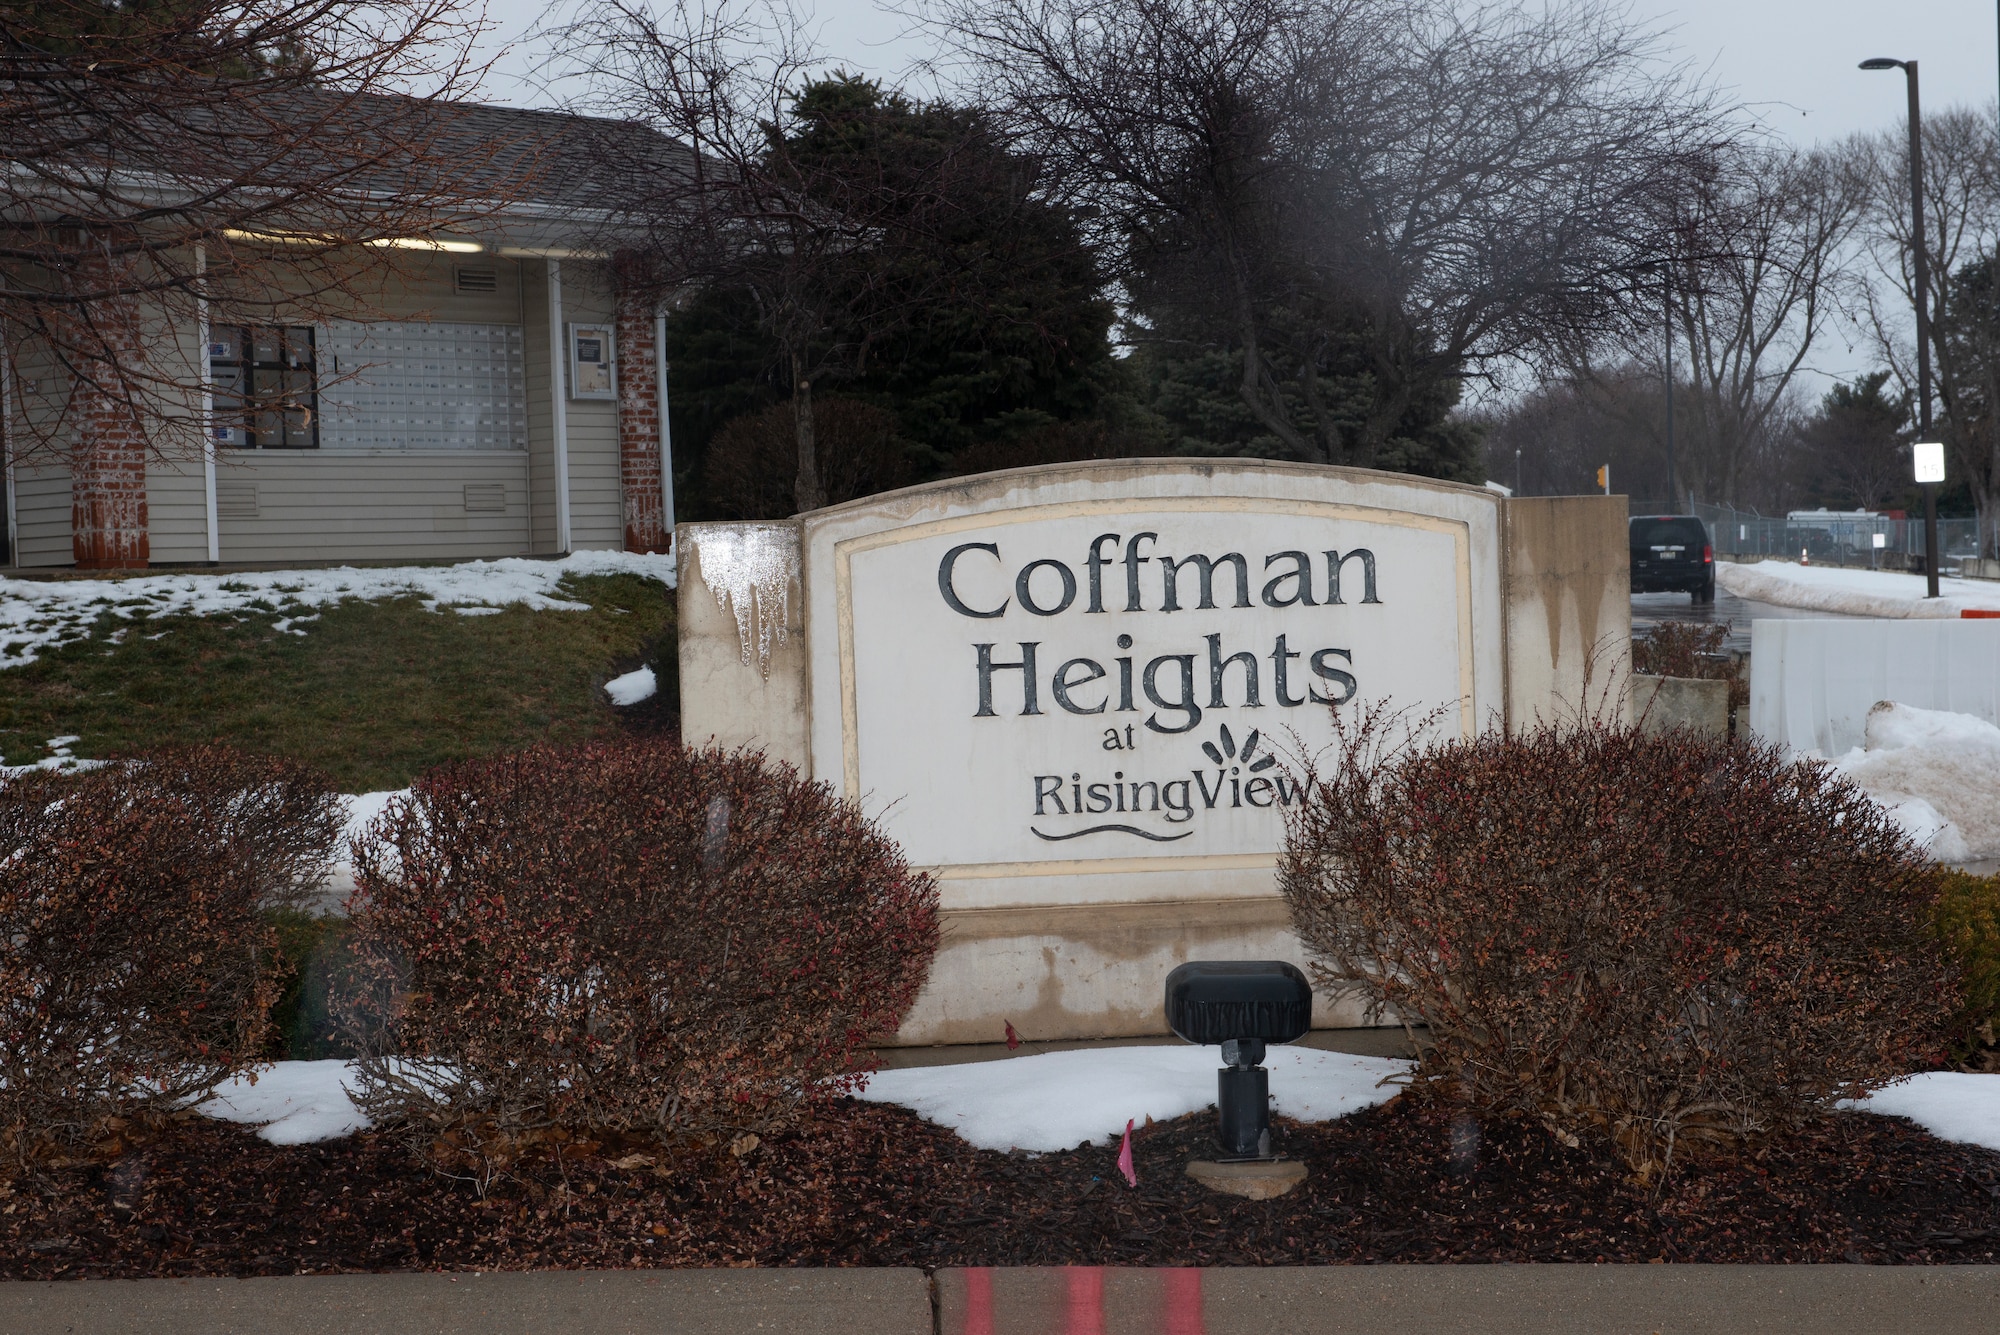 in the forefront of photograph, a large Coffman Heights stone marking the entrance to military housing